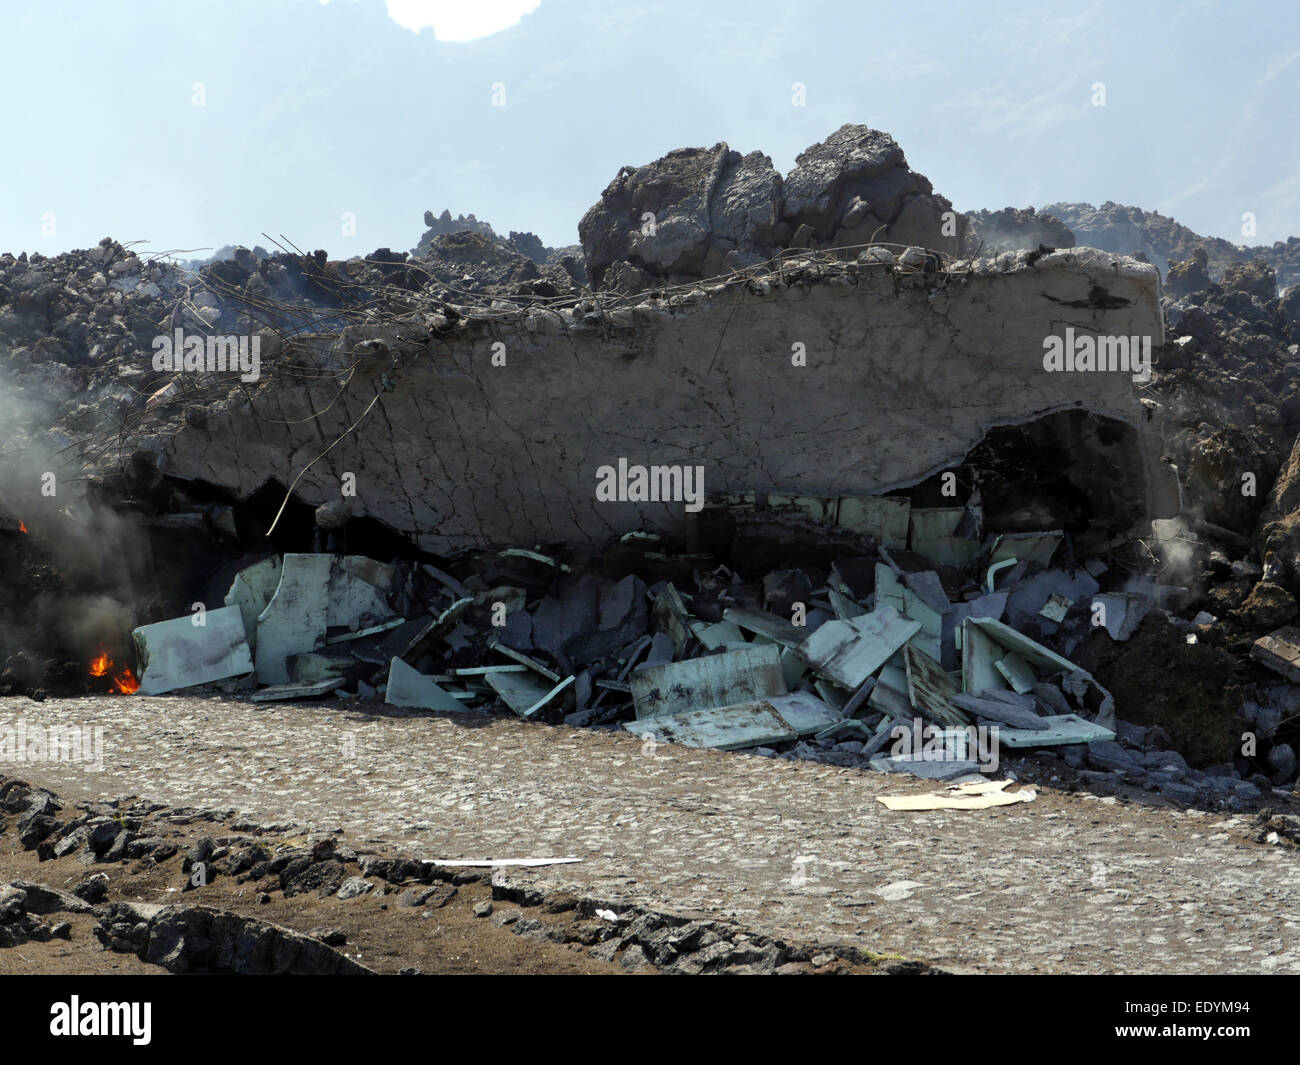 Lava flow destroys a house at Pico do Fogo in Cape Verde - December 2014 Stock Photo